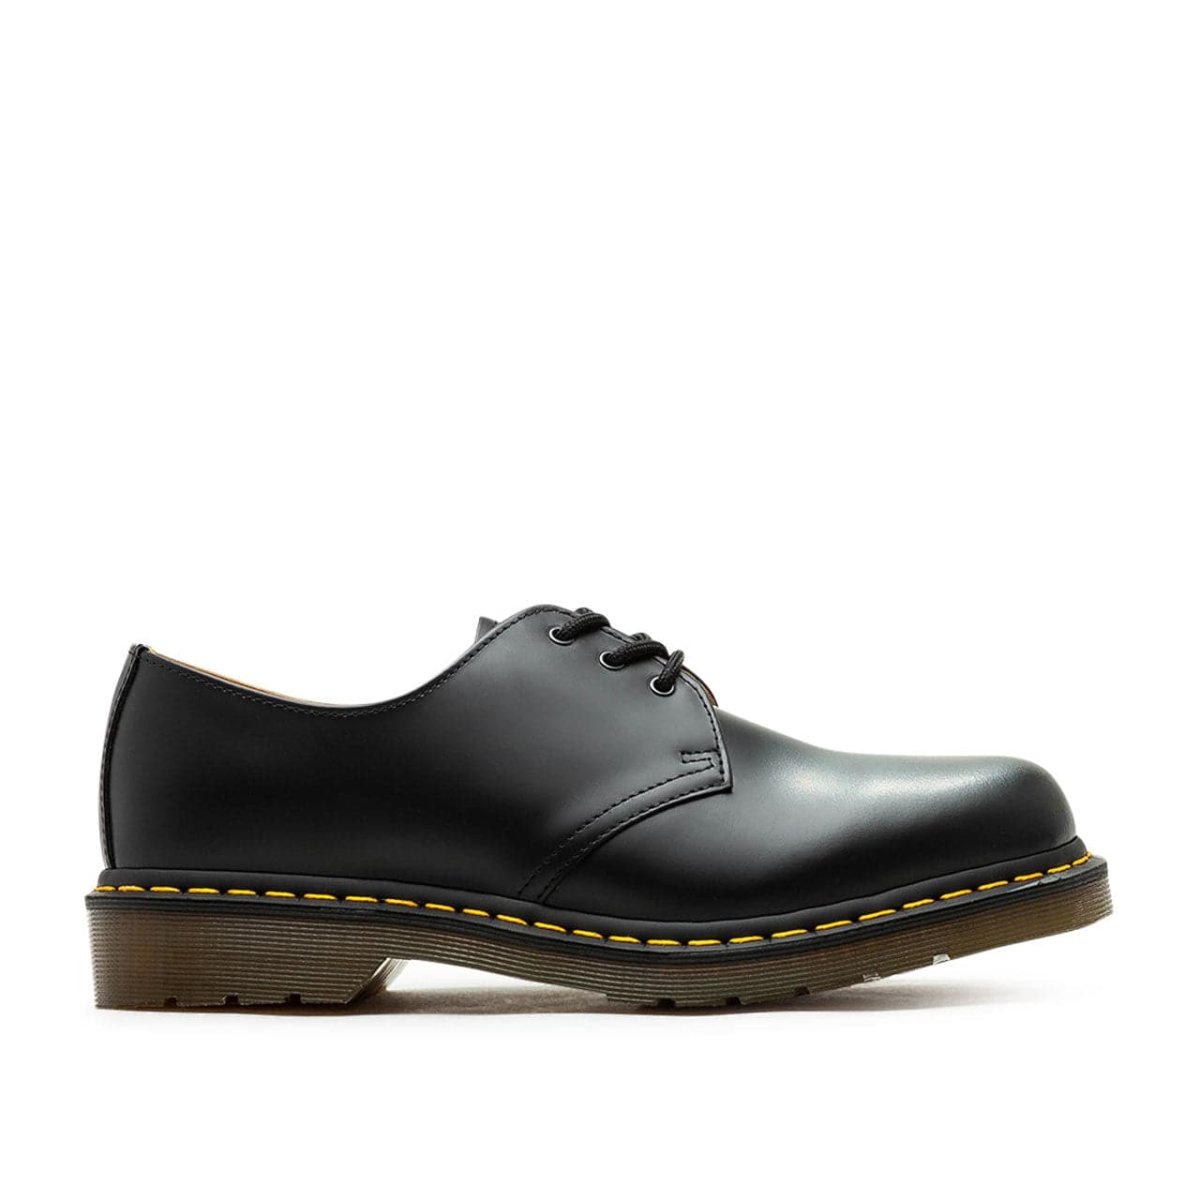 Image of Dr. Martens 1461 Smooth Leather Shoes (Black)